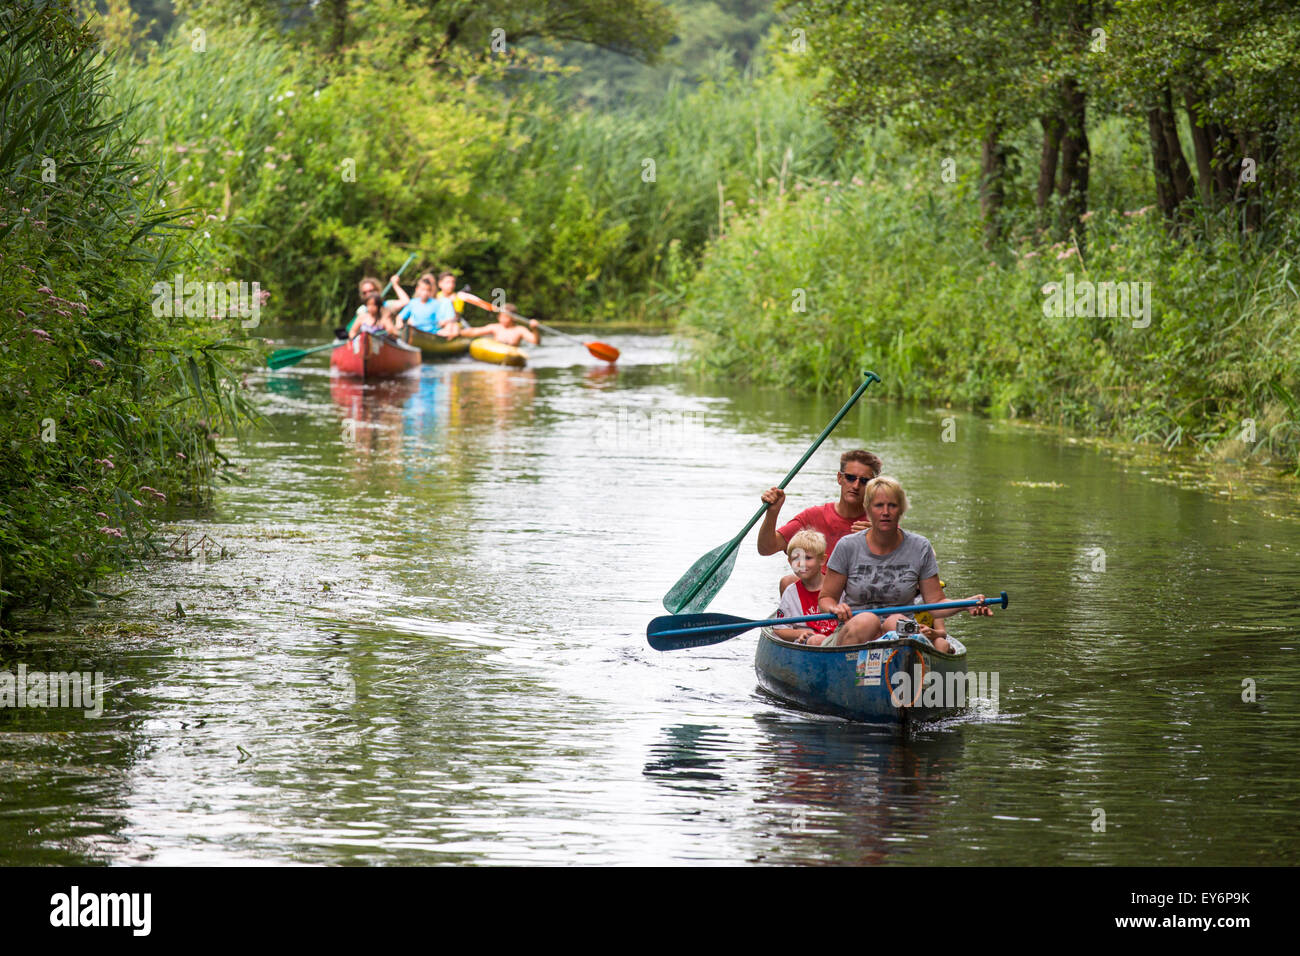 Canoeing tourists passing at meandering river the 'Dommel' in the Netherlands Stock Photo